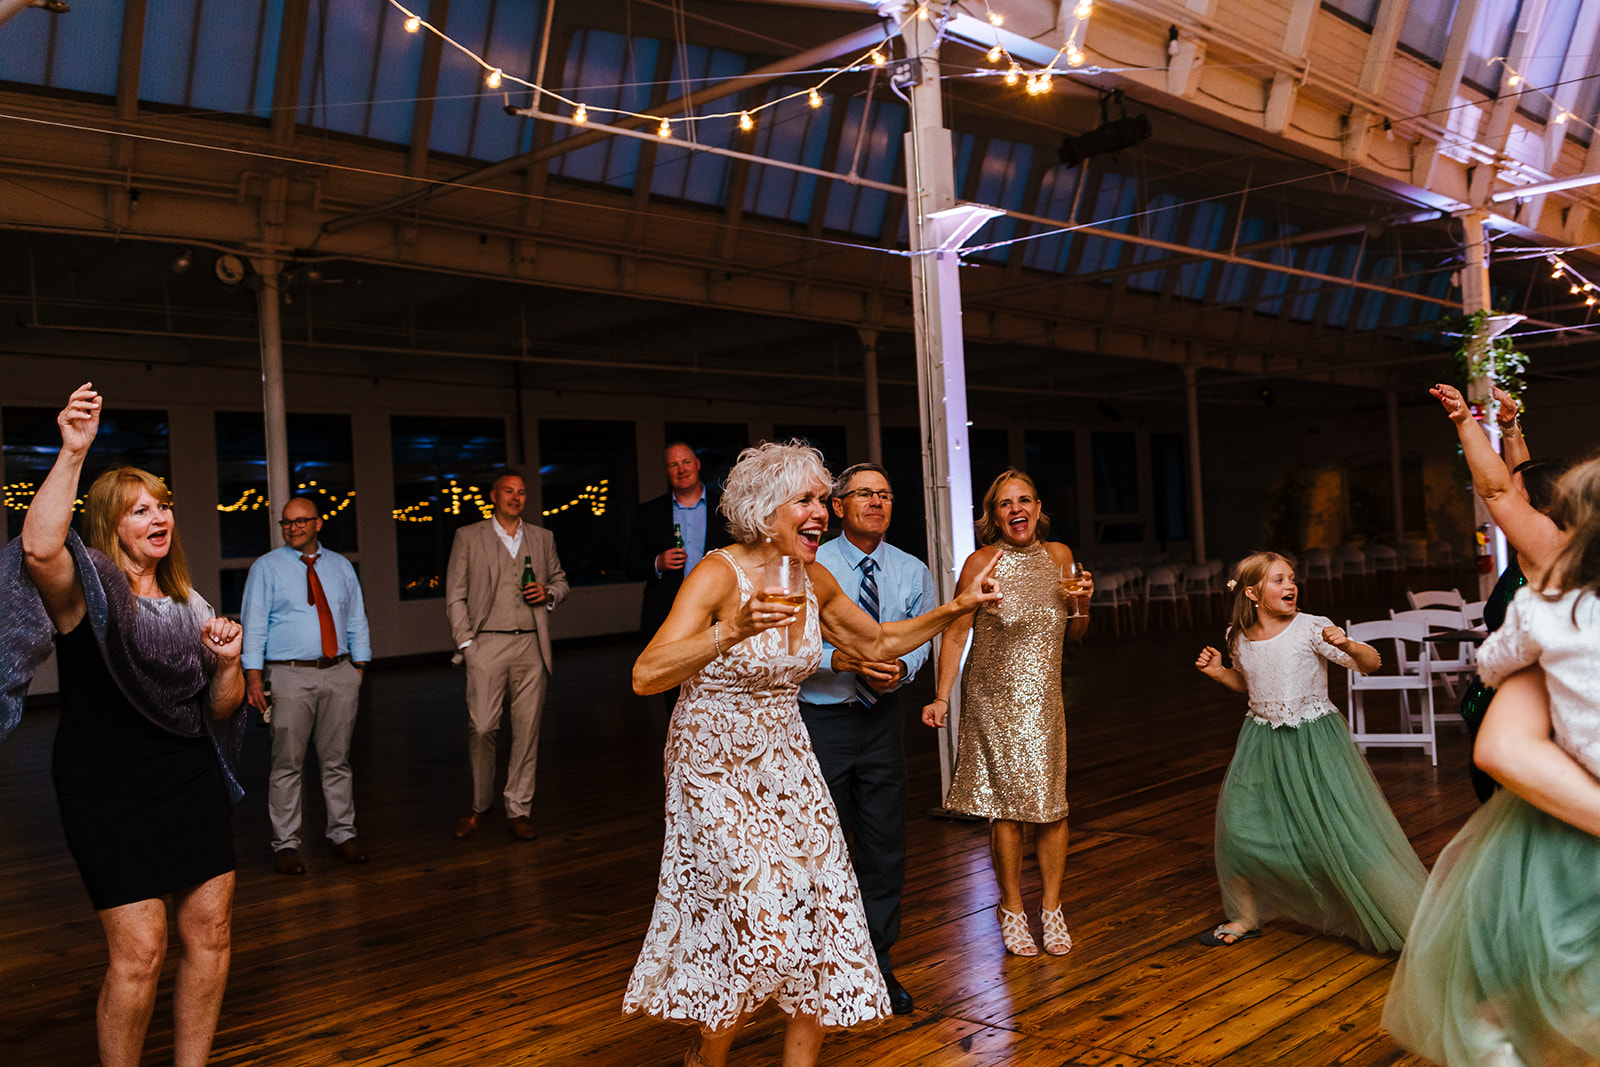 Guests dance and party at the Greylock Works wedding in the Berkshires.